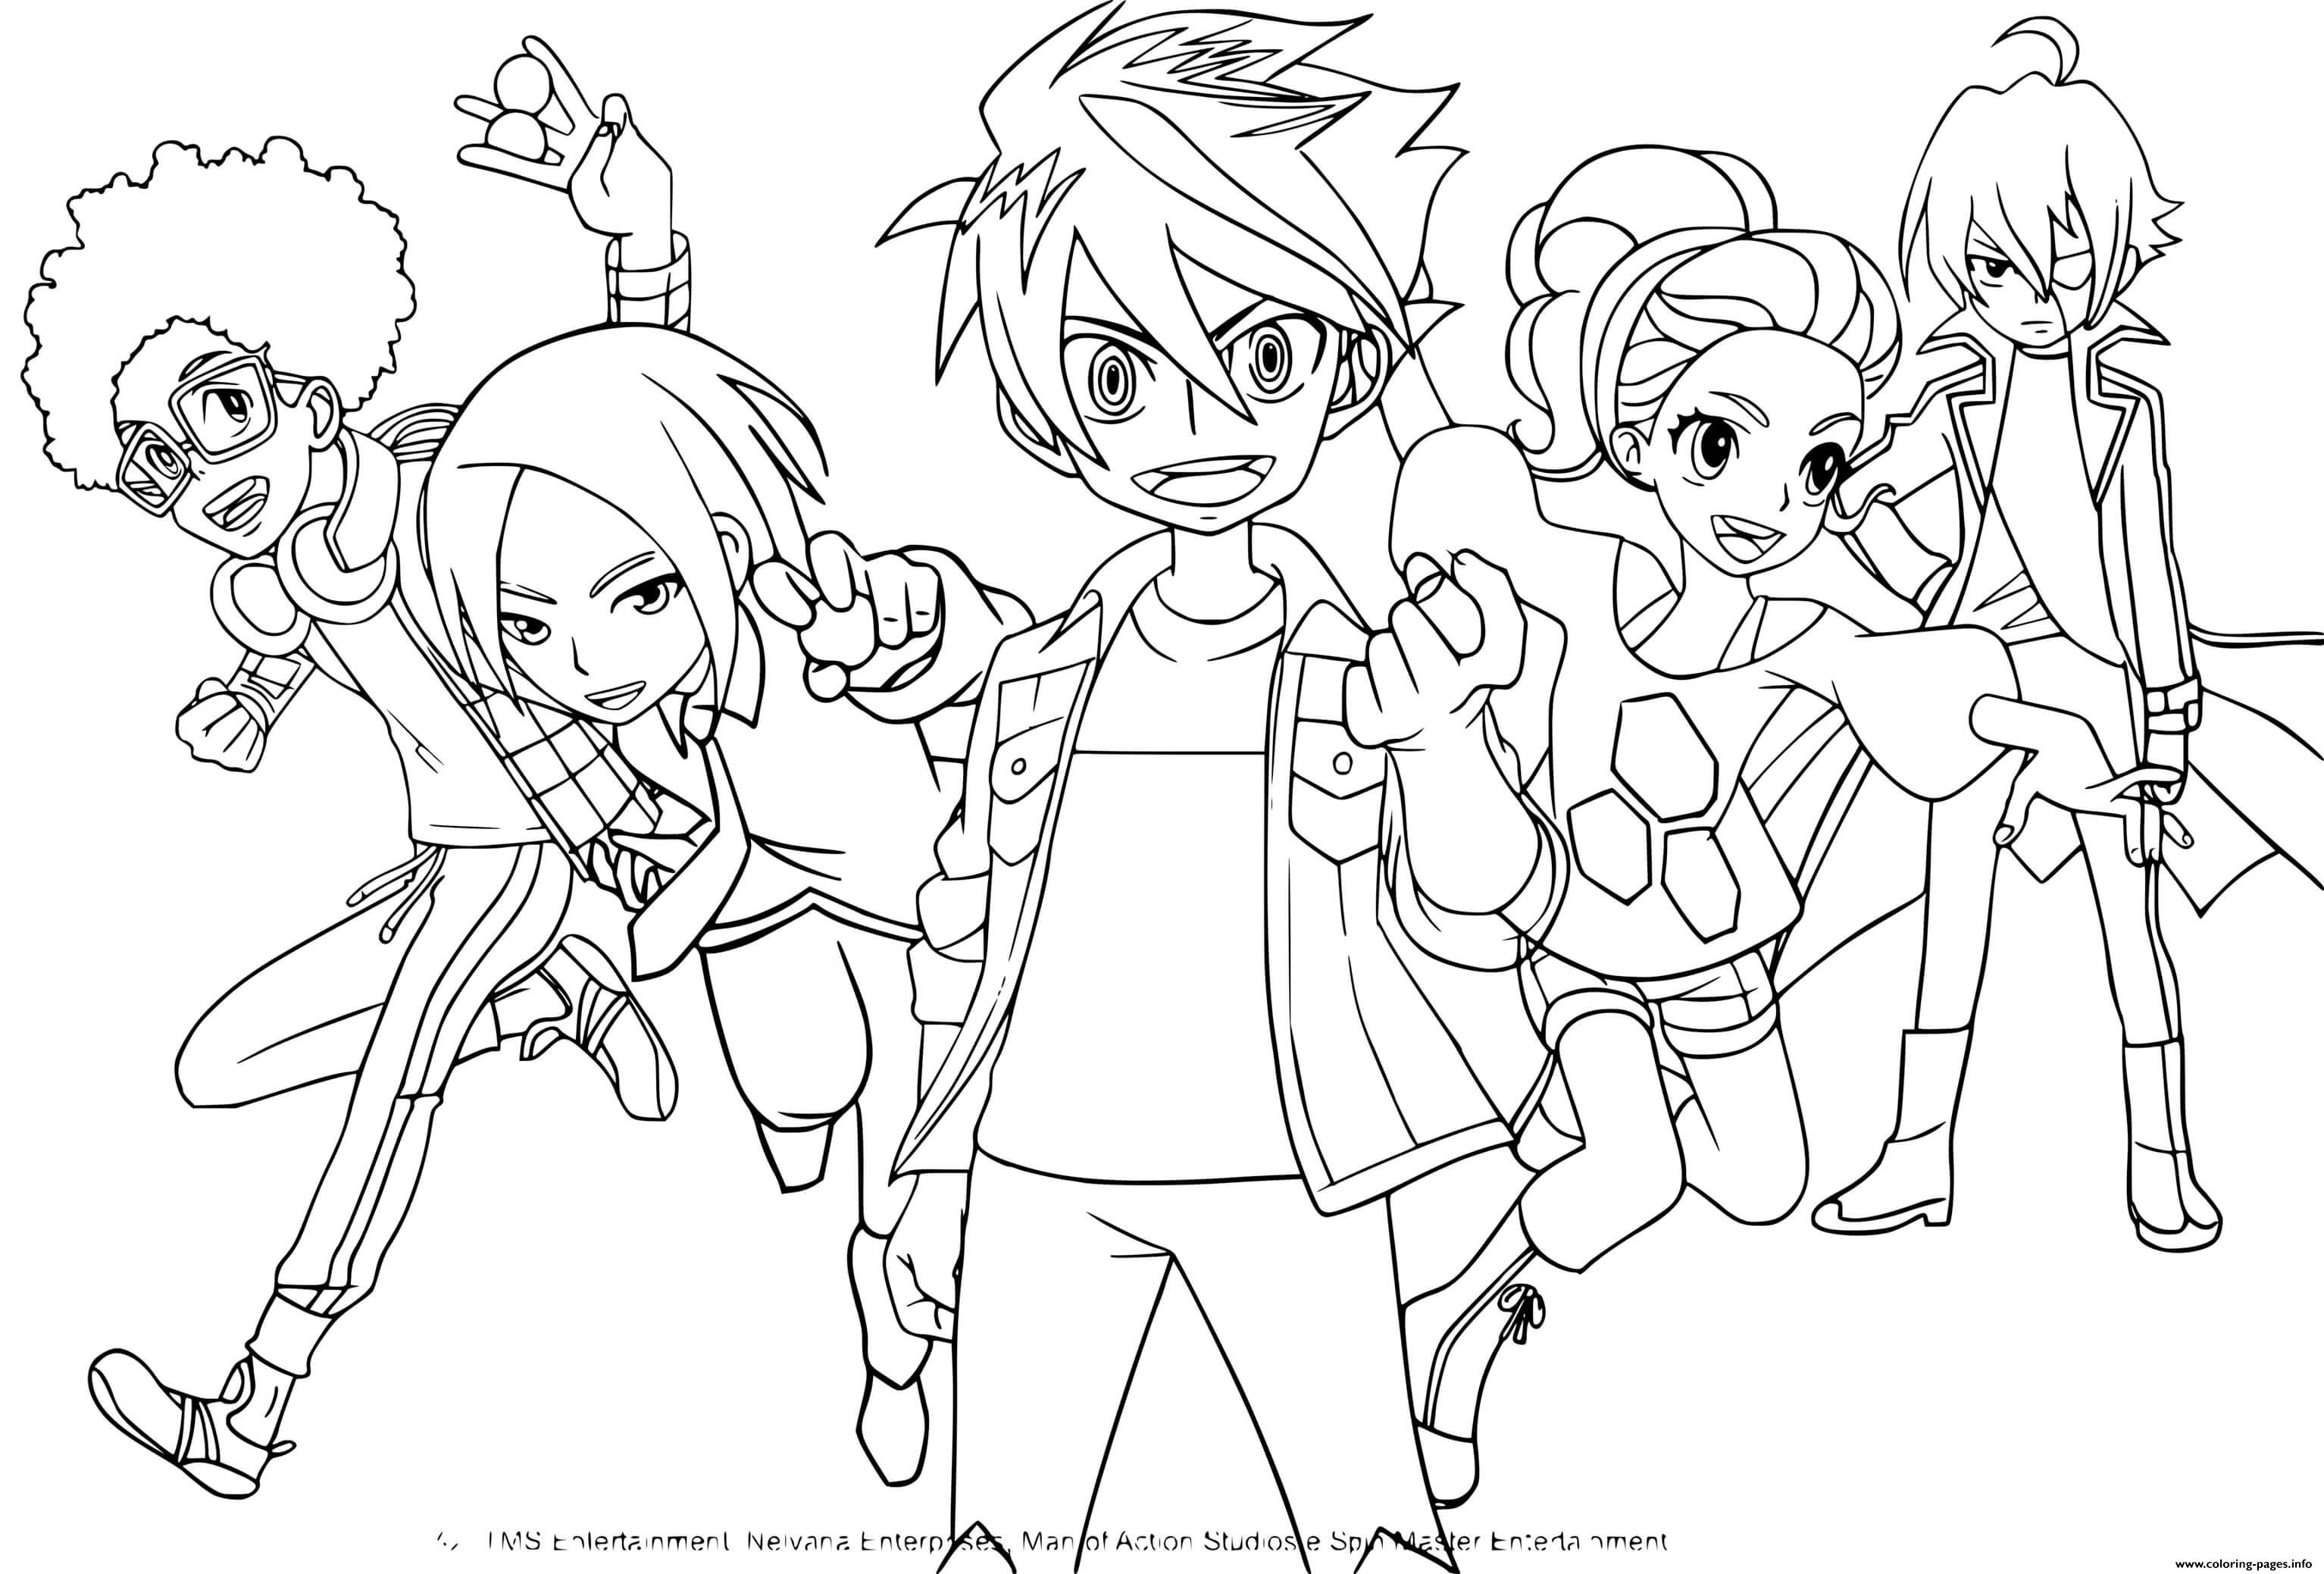 Bakugan Coloring Pages For Kids - img-sunflower